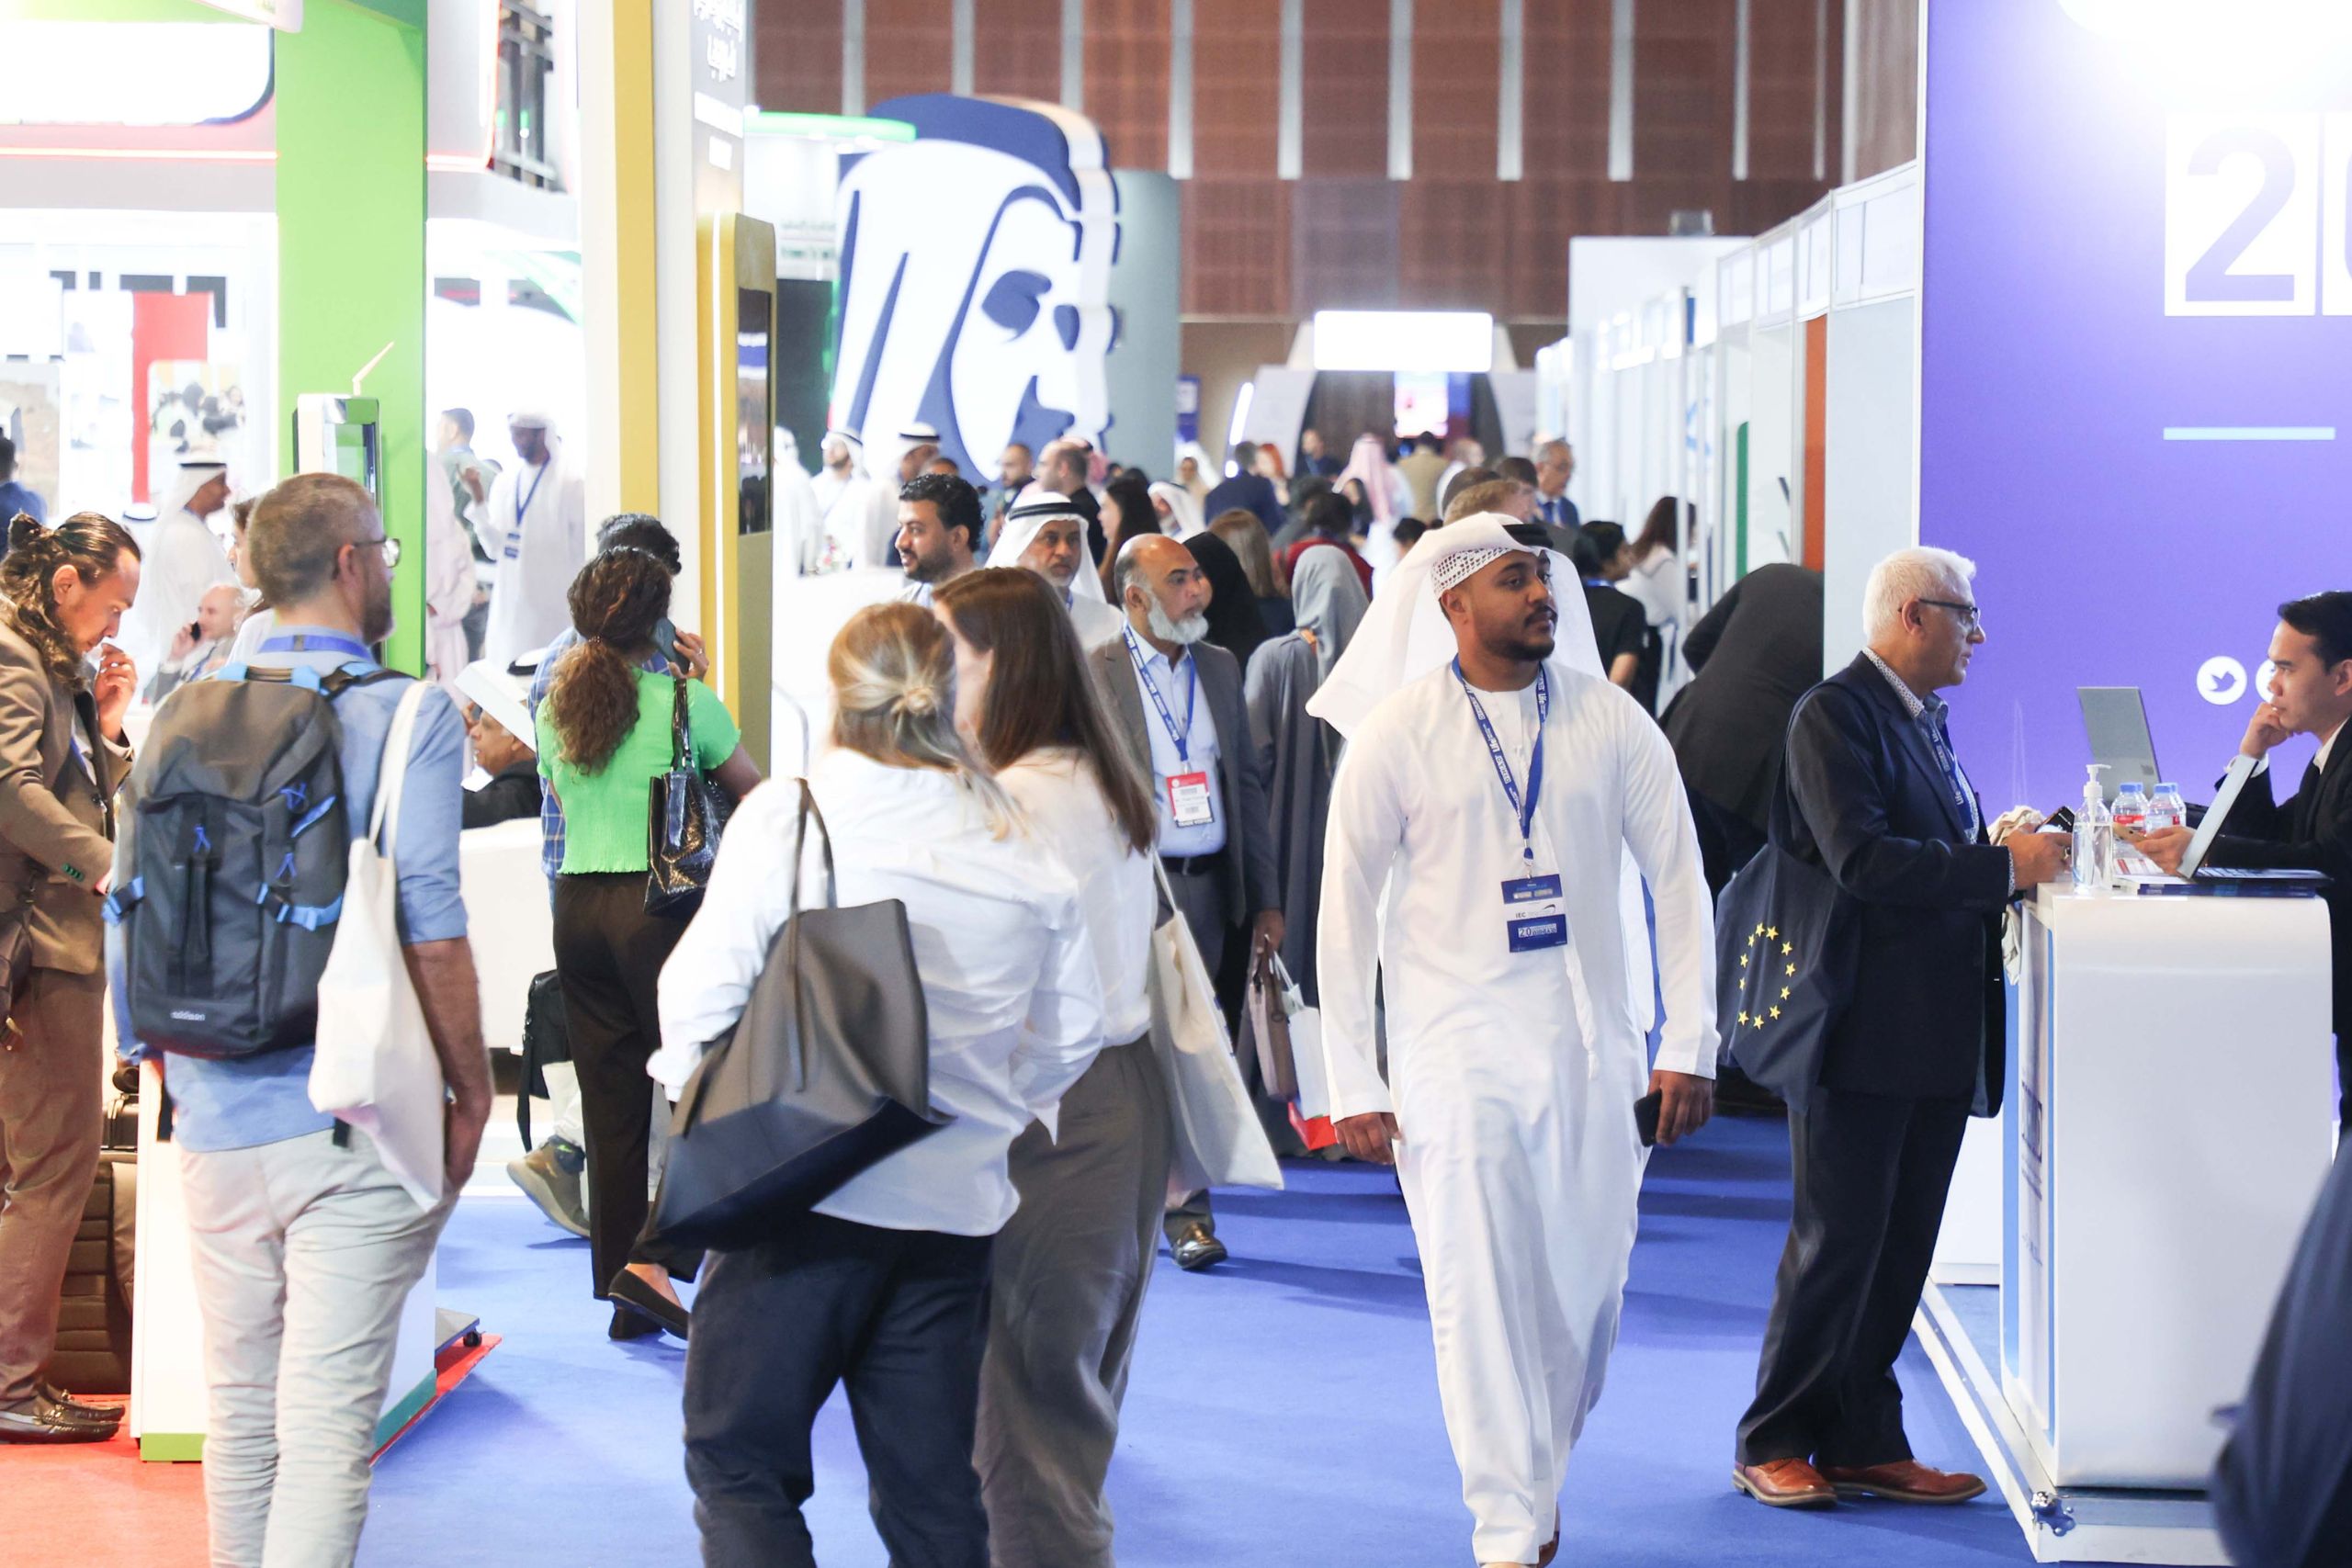 DIHAD 2023 records over 12,000 visitors to support humanitarian work in the heart of Dubai